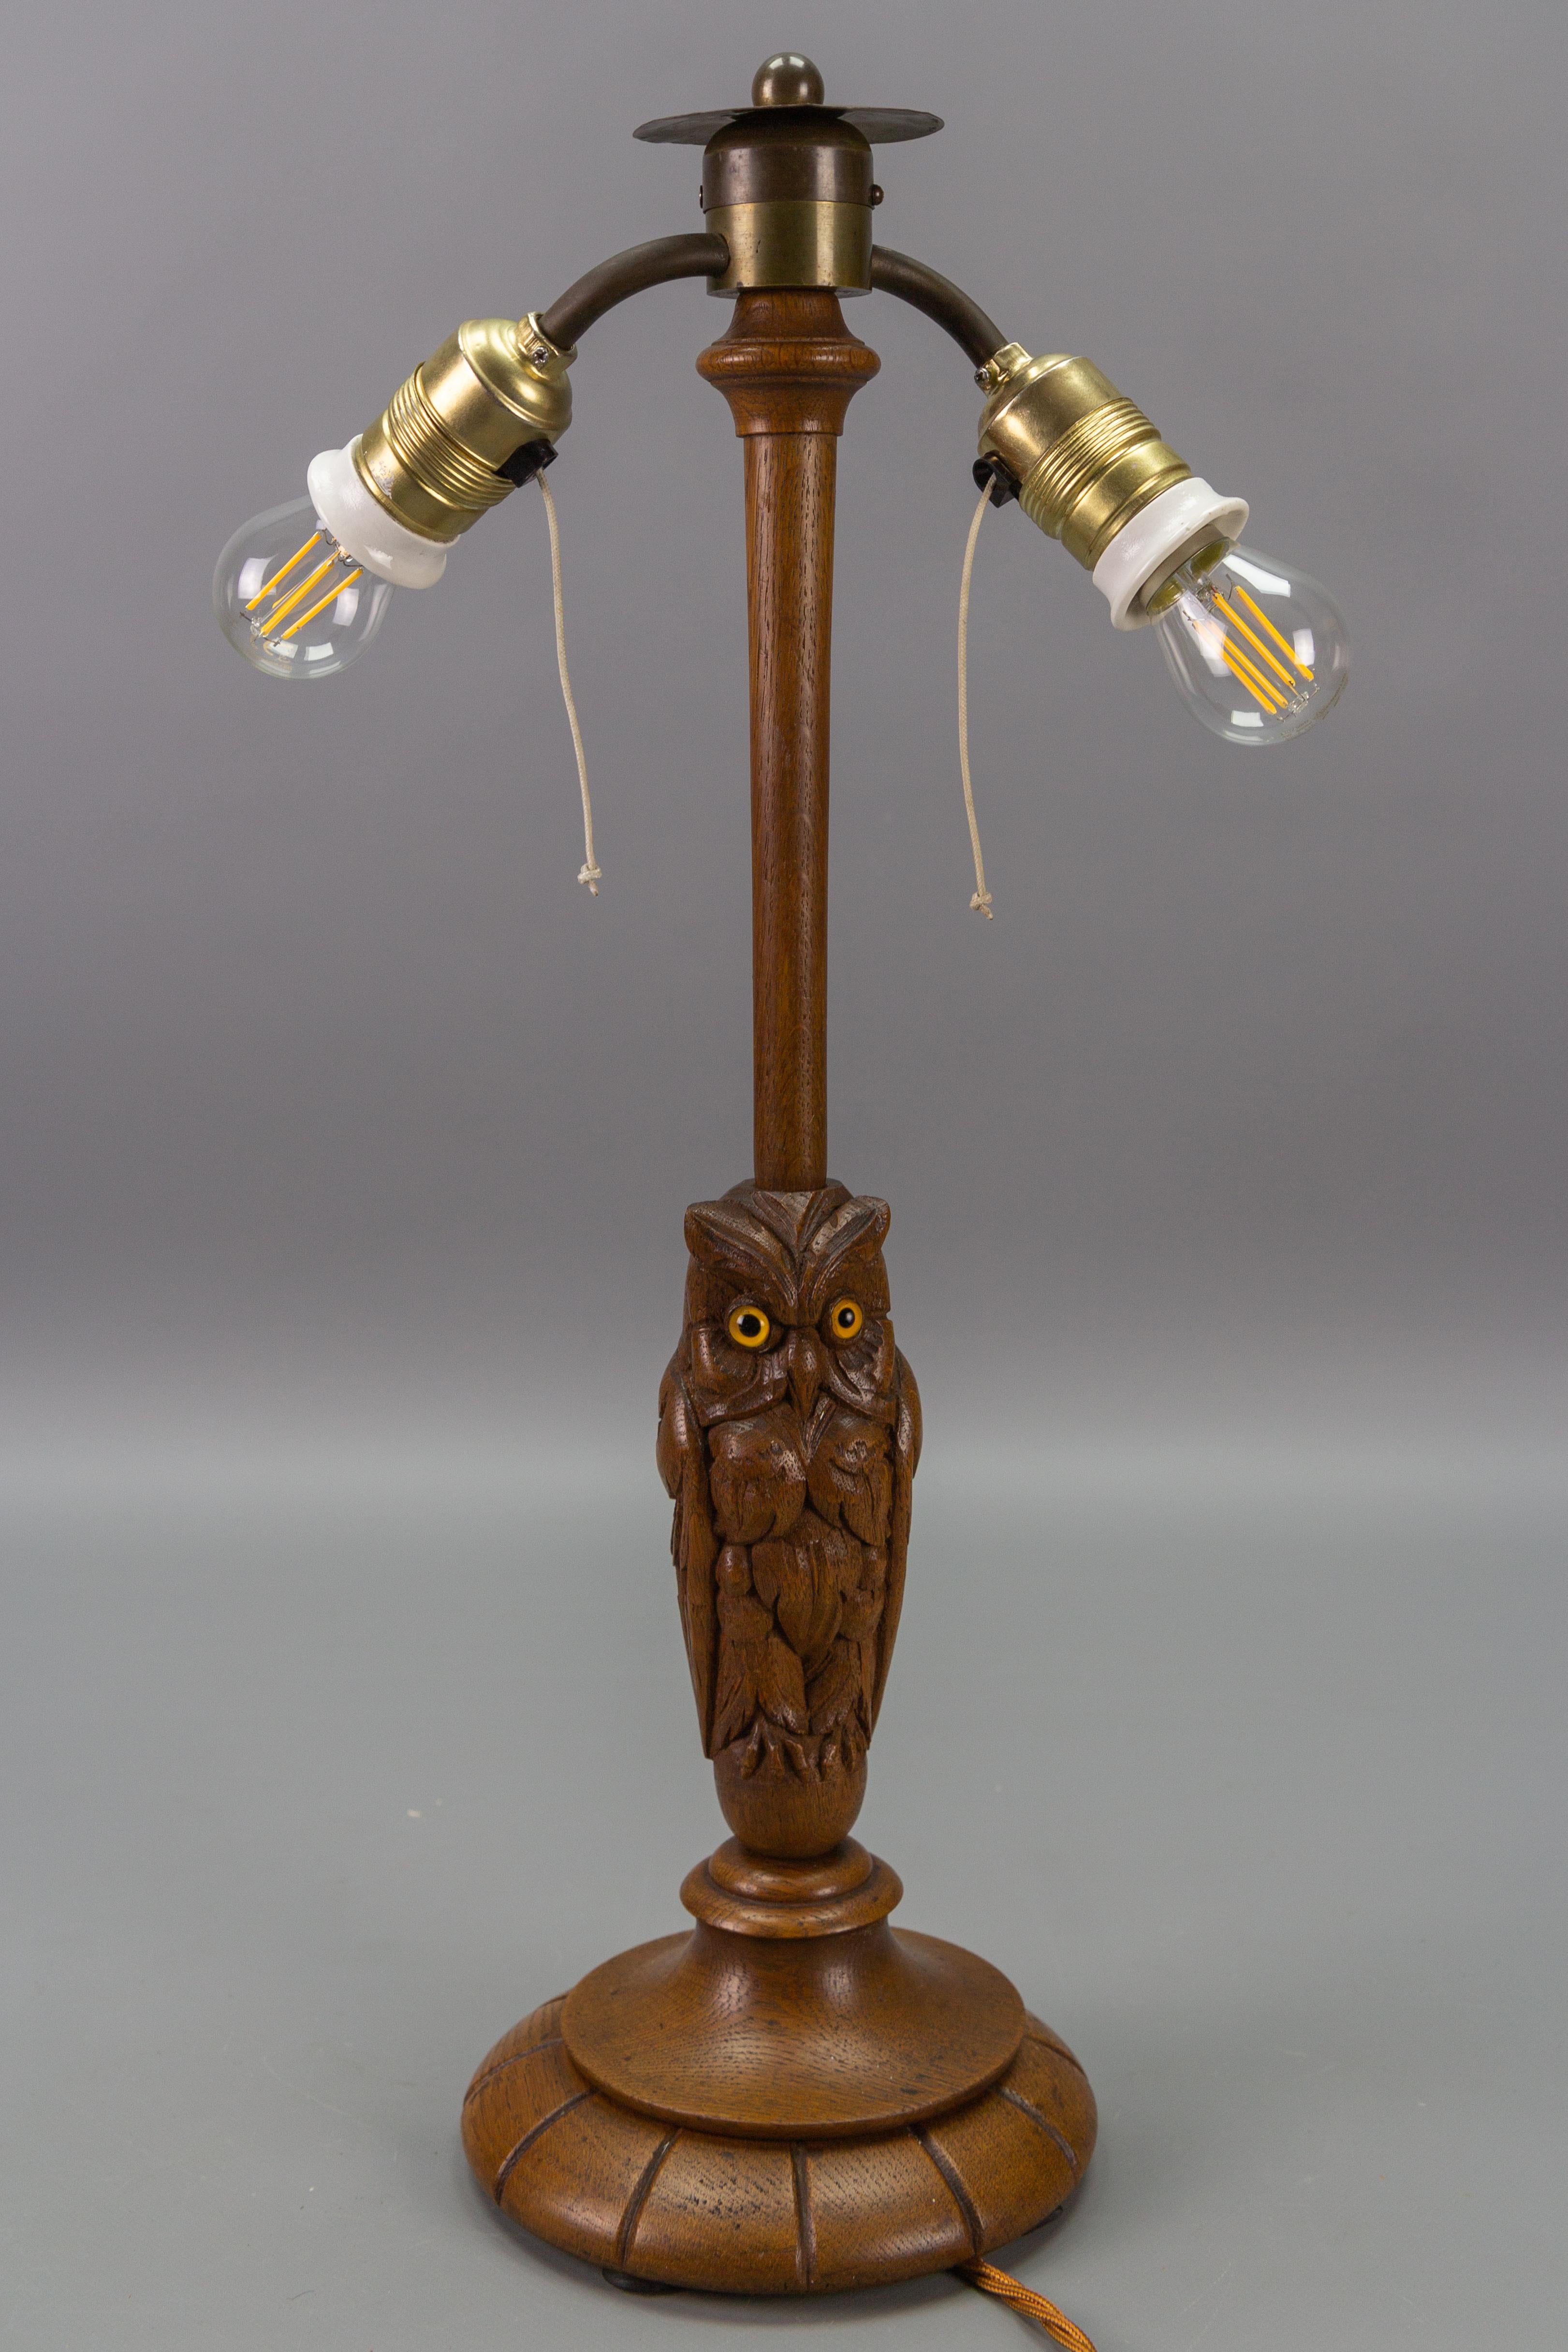 Brass Antique Art Deco Two-Light Owl Sculpture Table or Desk Lamp  Germany, ca. 1920 For Sale